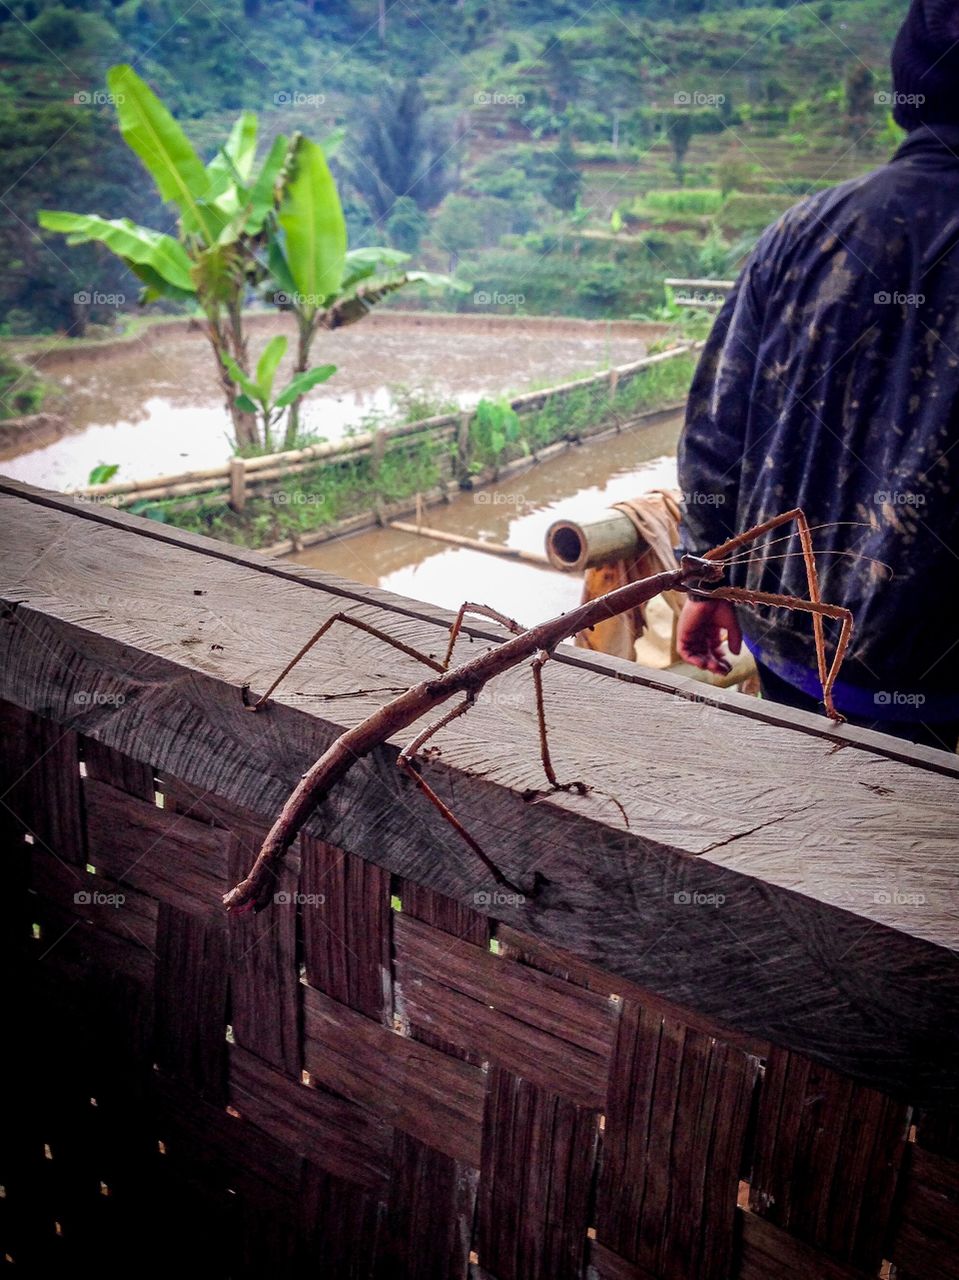 Walking stick insect 